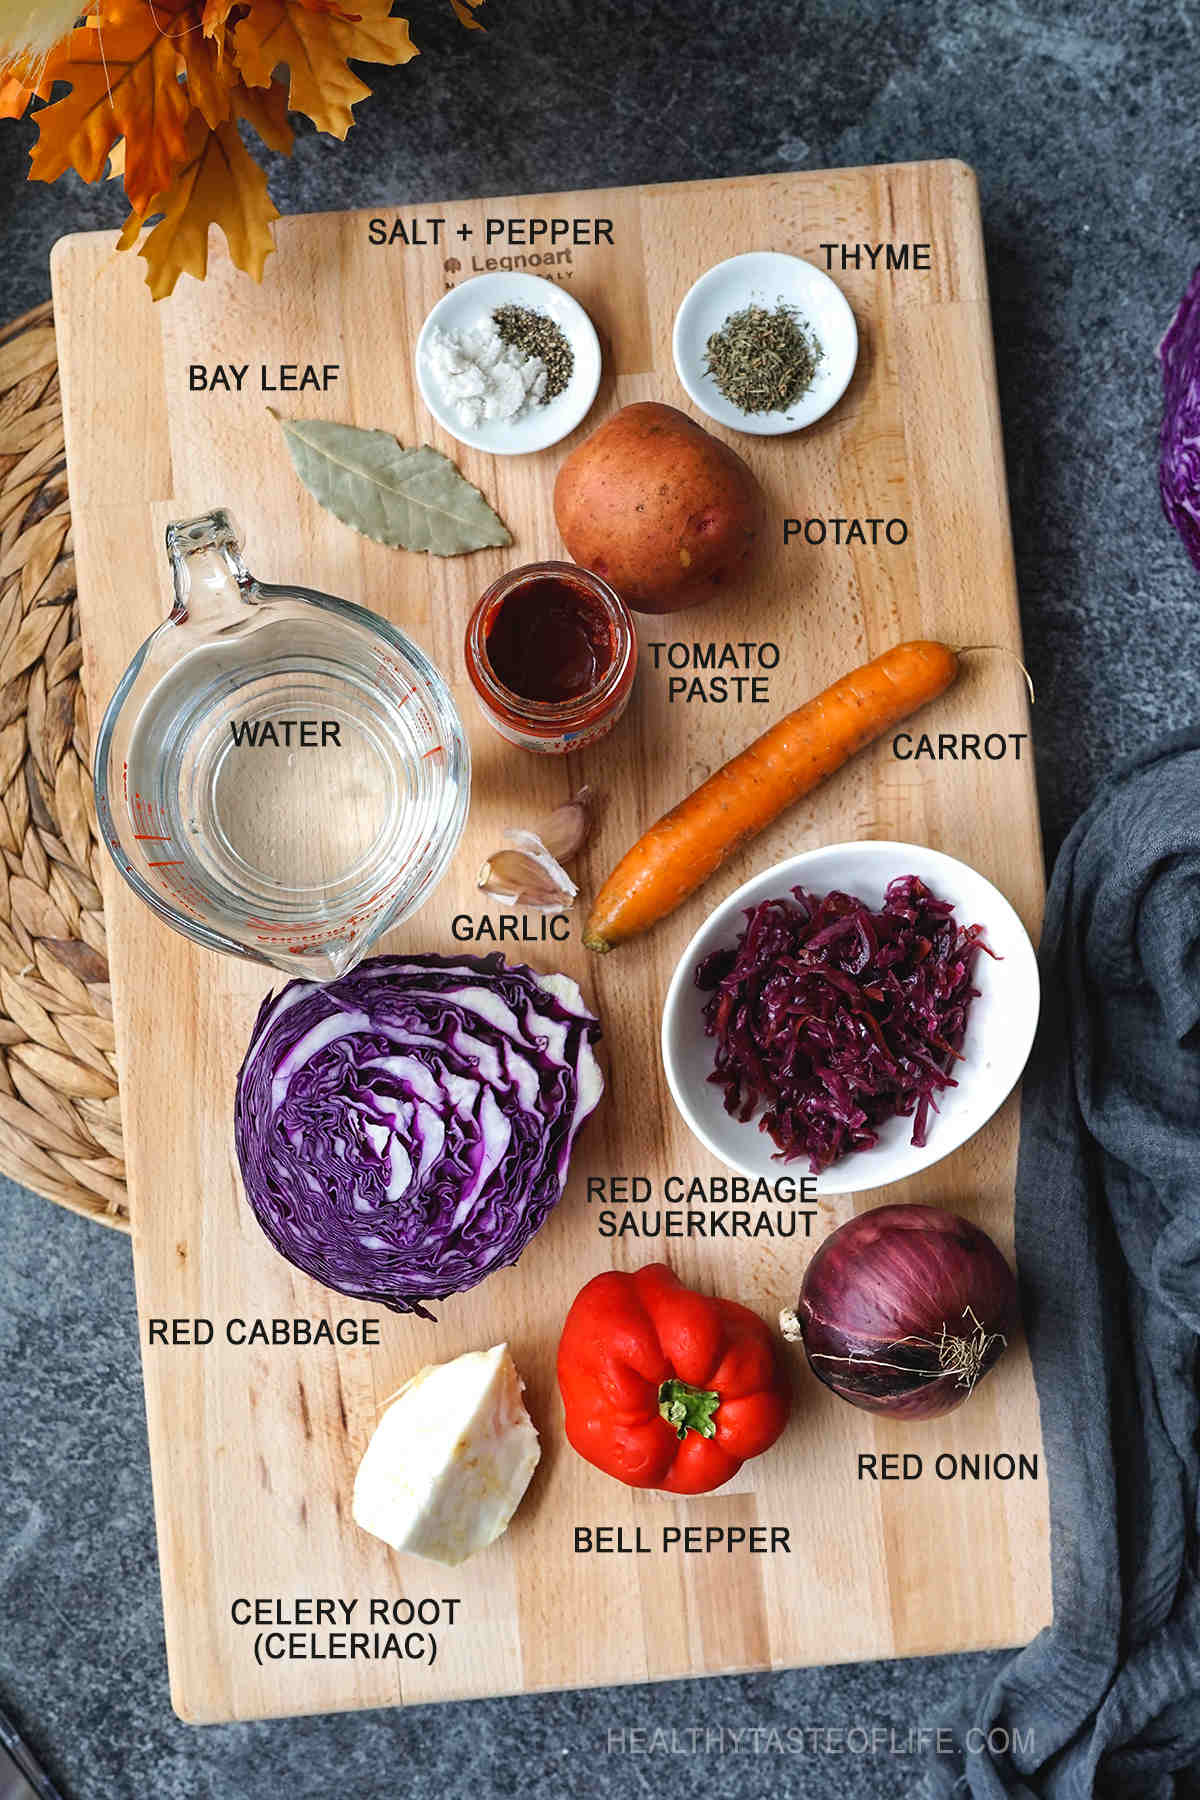 Image showing all ingredients for making a red cabbage soup displayed on a board (red cabbage, carrot, potato, onion, garlic, celery root, bell pepper, tomato paste, red cabbage sauerkraut and seasonings)